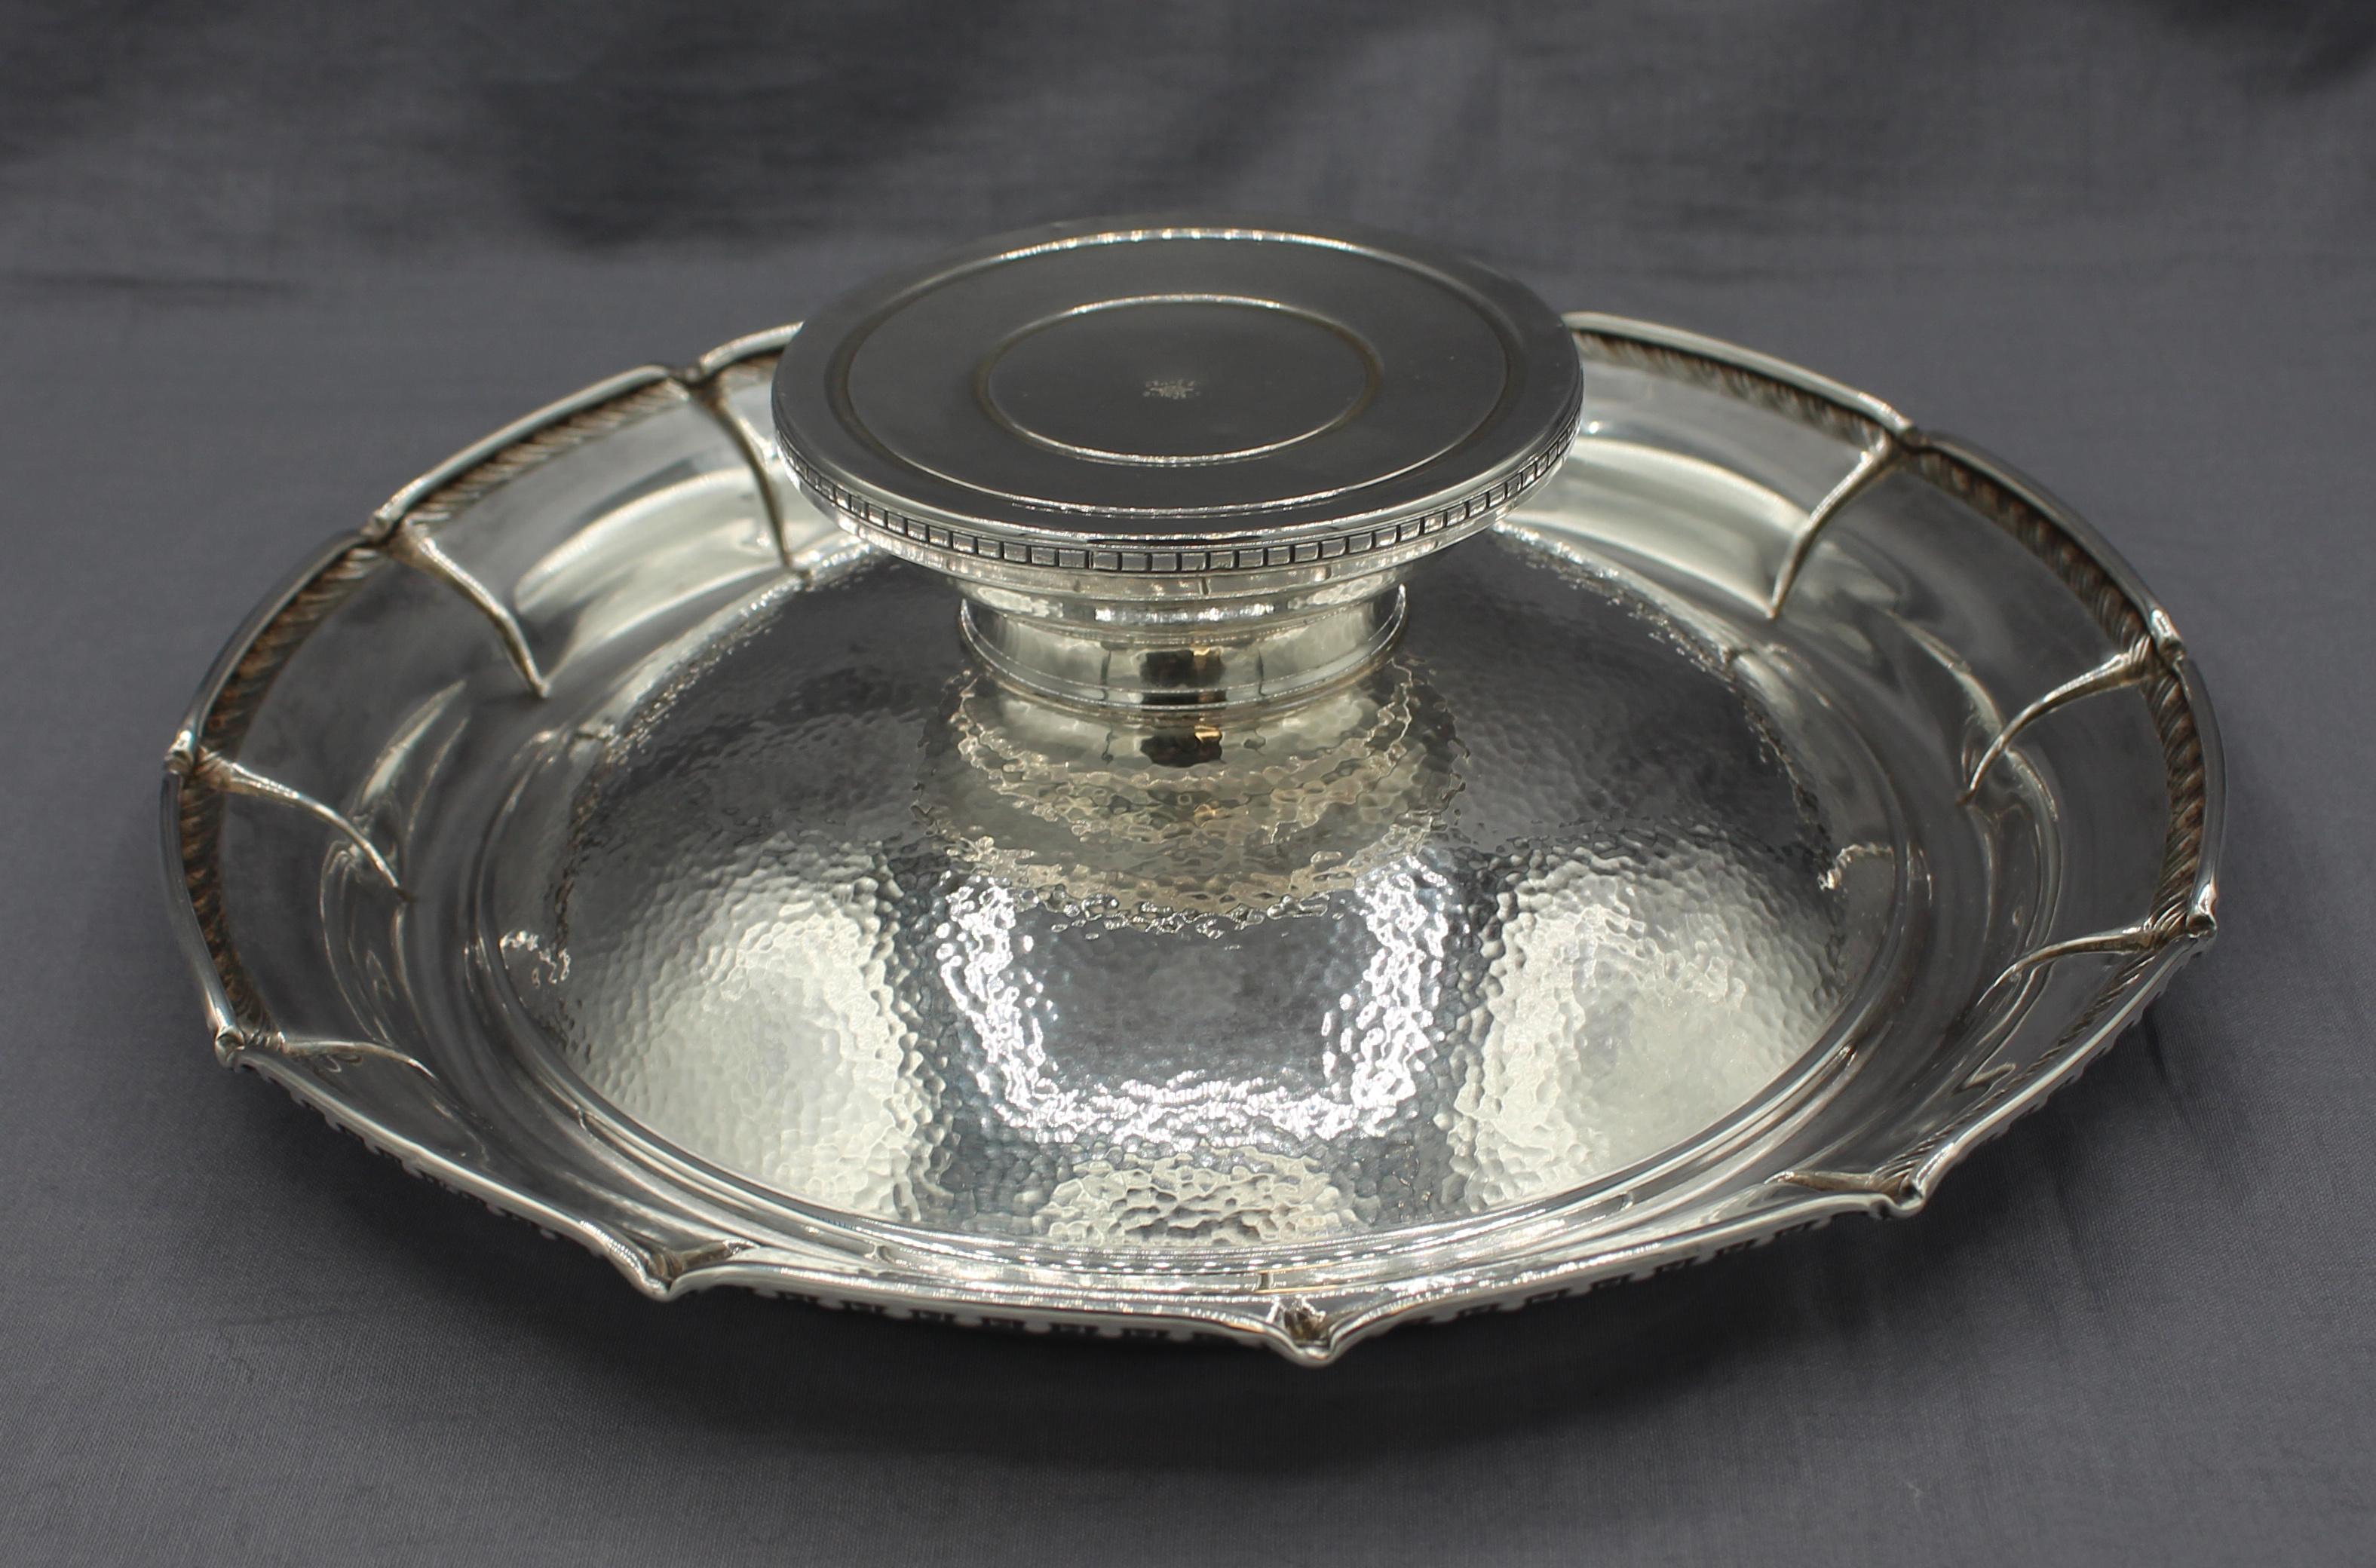 Hammered finish sterling silver large compote, c.1920-30s, by Webster. Lobed edge with gadroon border, a strikingly modern effect. Weighted base.
9.25